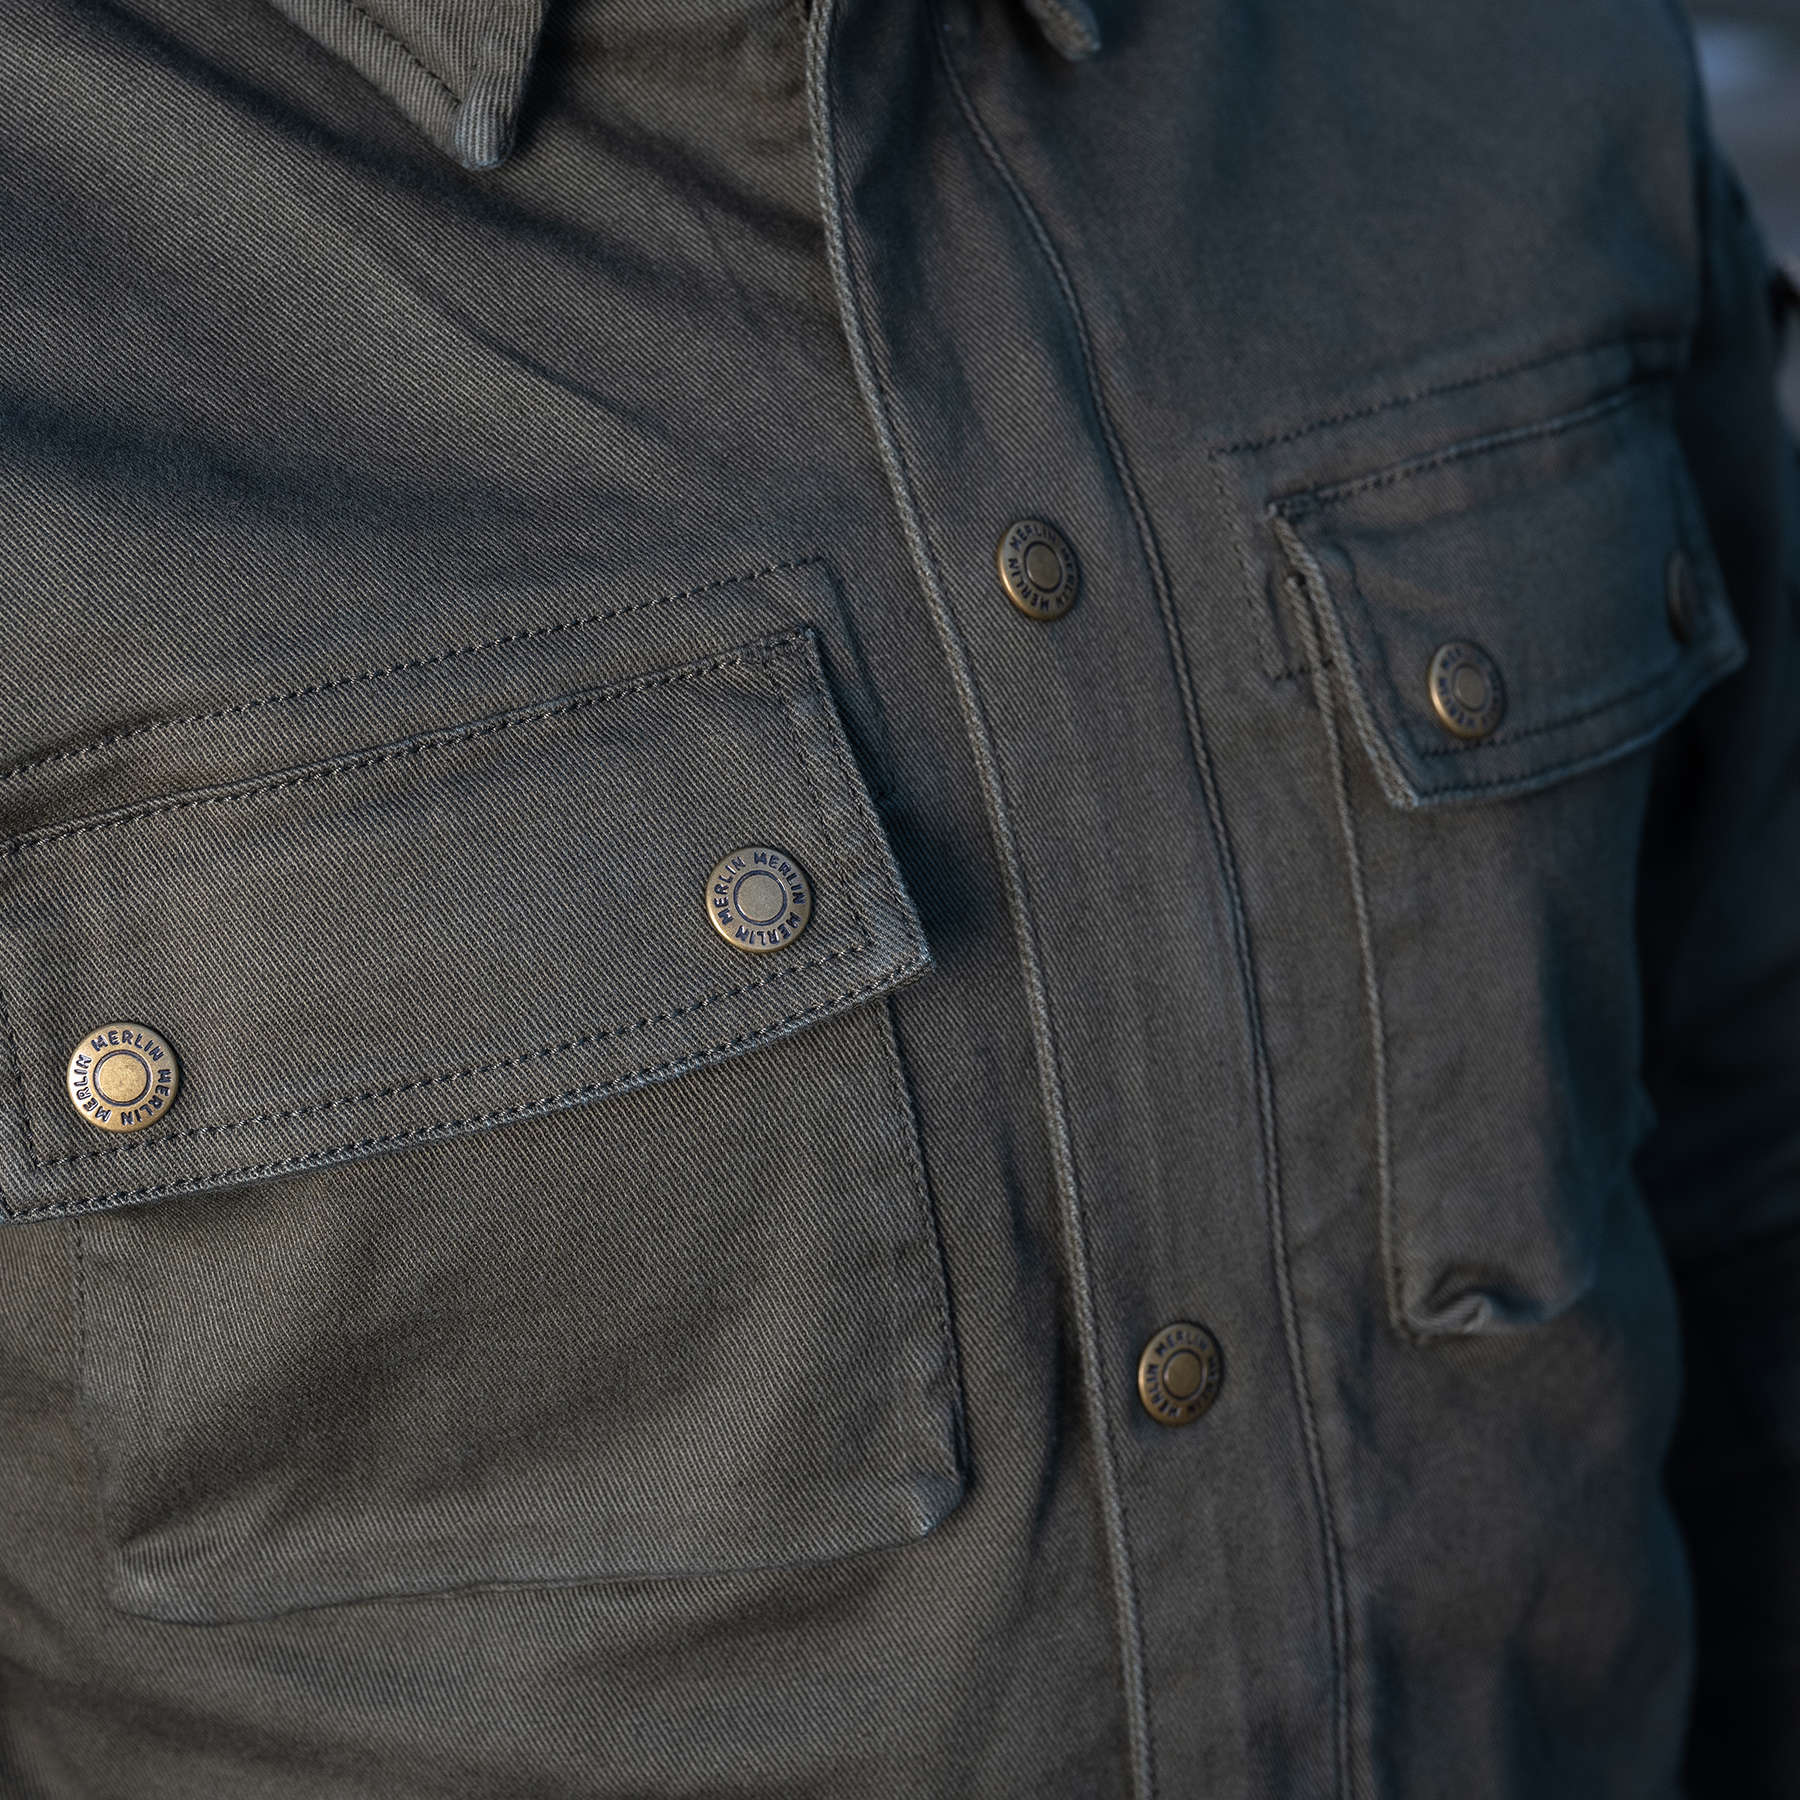 Lifestyle detail image of Merlin Brody D3O Single Layer Riding Shirt in olive